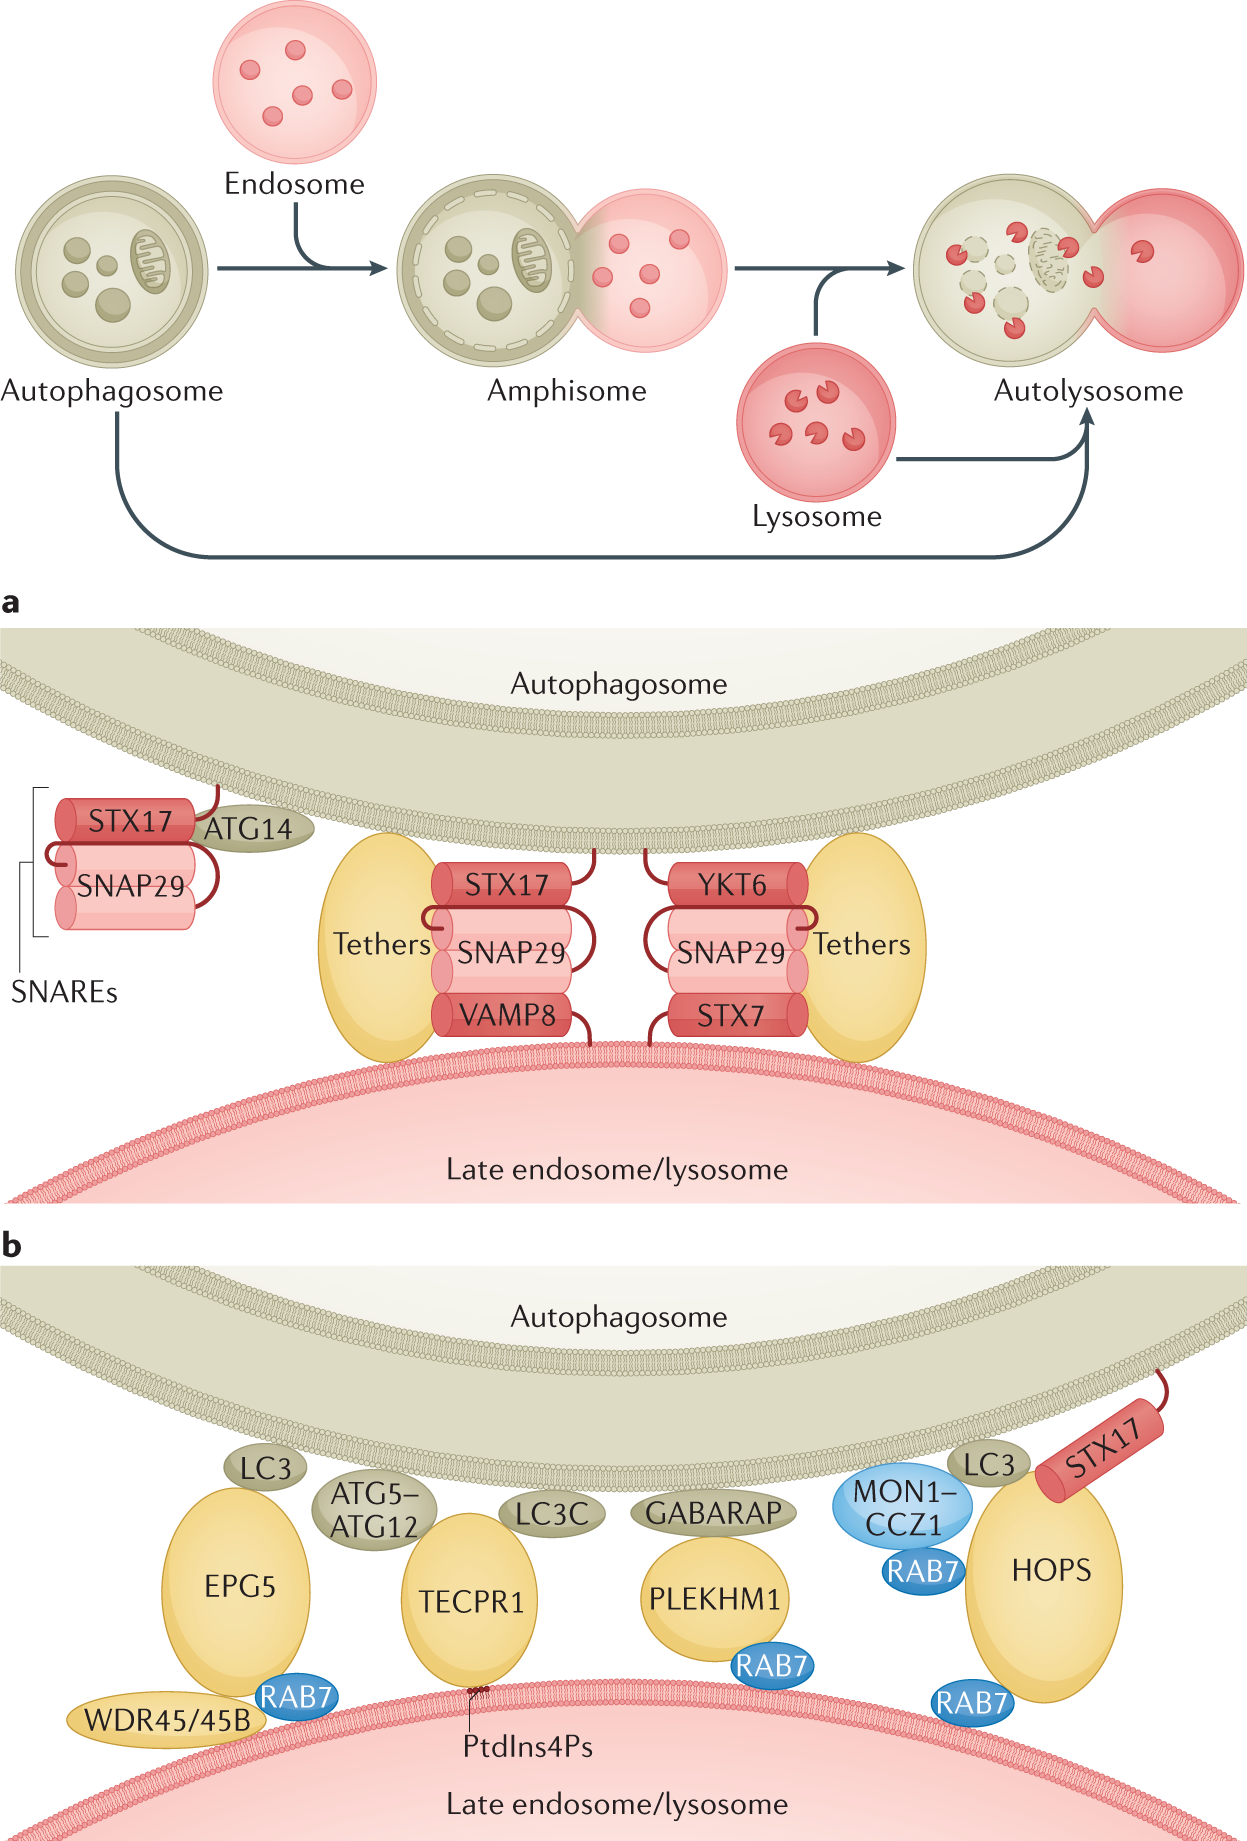 Machinery Regulation And Pathophysiological Implications Of Autophagosome Maturation Nature Reviews Molecular Cell Biology